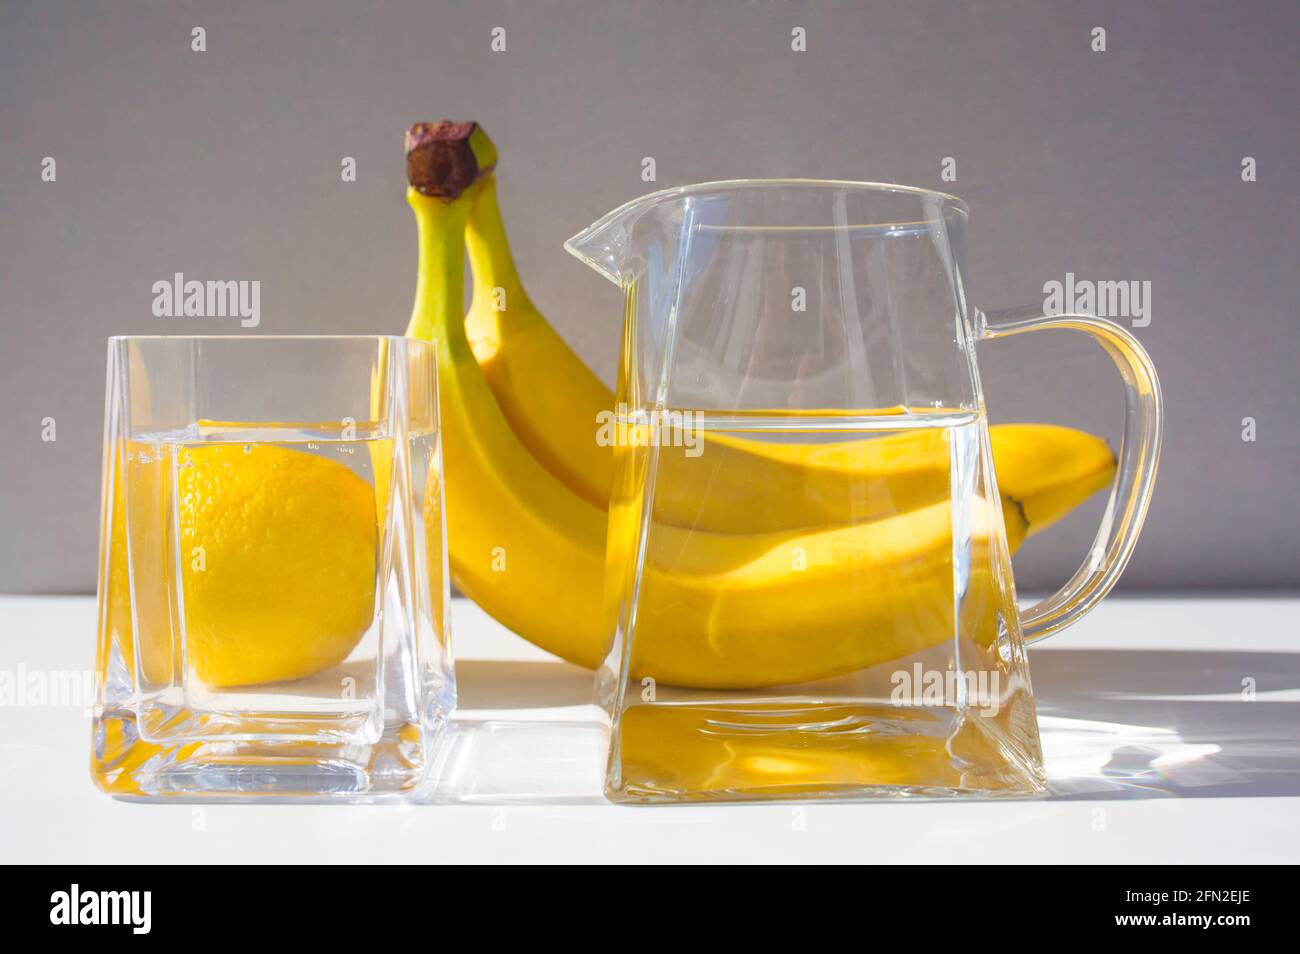 Pure water in glass jug and glass, yellow fruits on background. Stock Photo